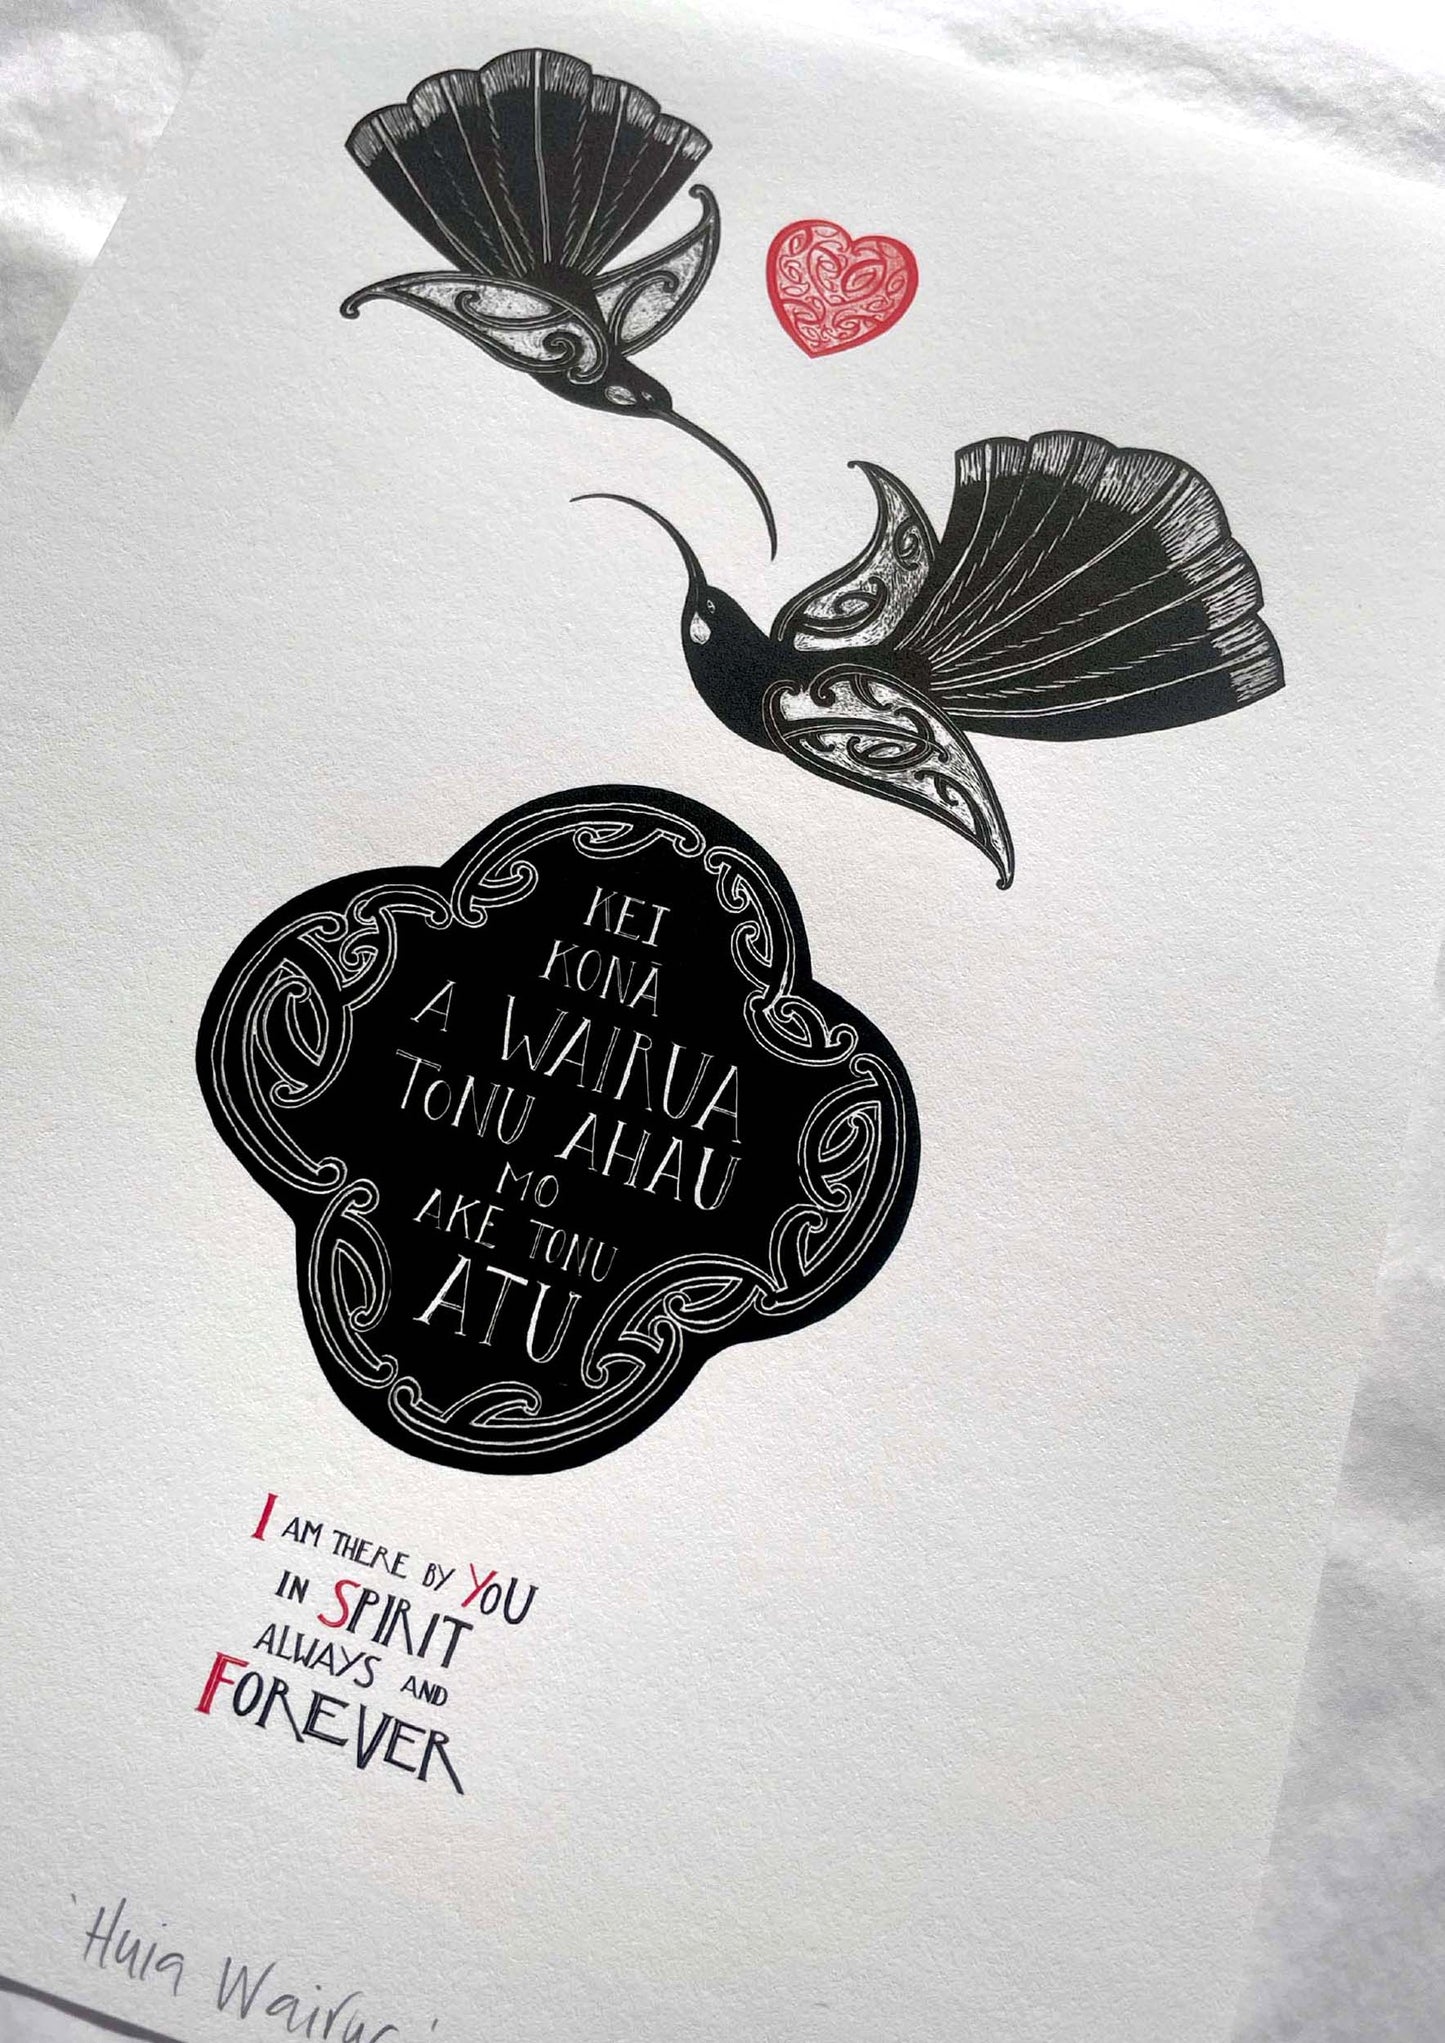 Huia Wairua limited edition art print by nz artist Amber Smith. I am there by you in spirit - always and forever written in te reo Maori and English translation. Maori art design Huia birds and aroha love heart.